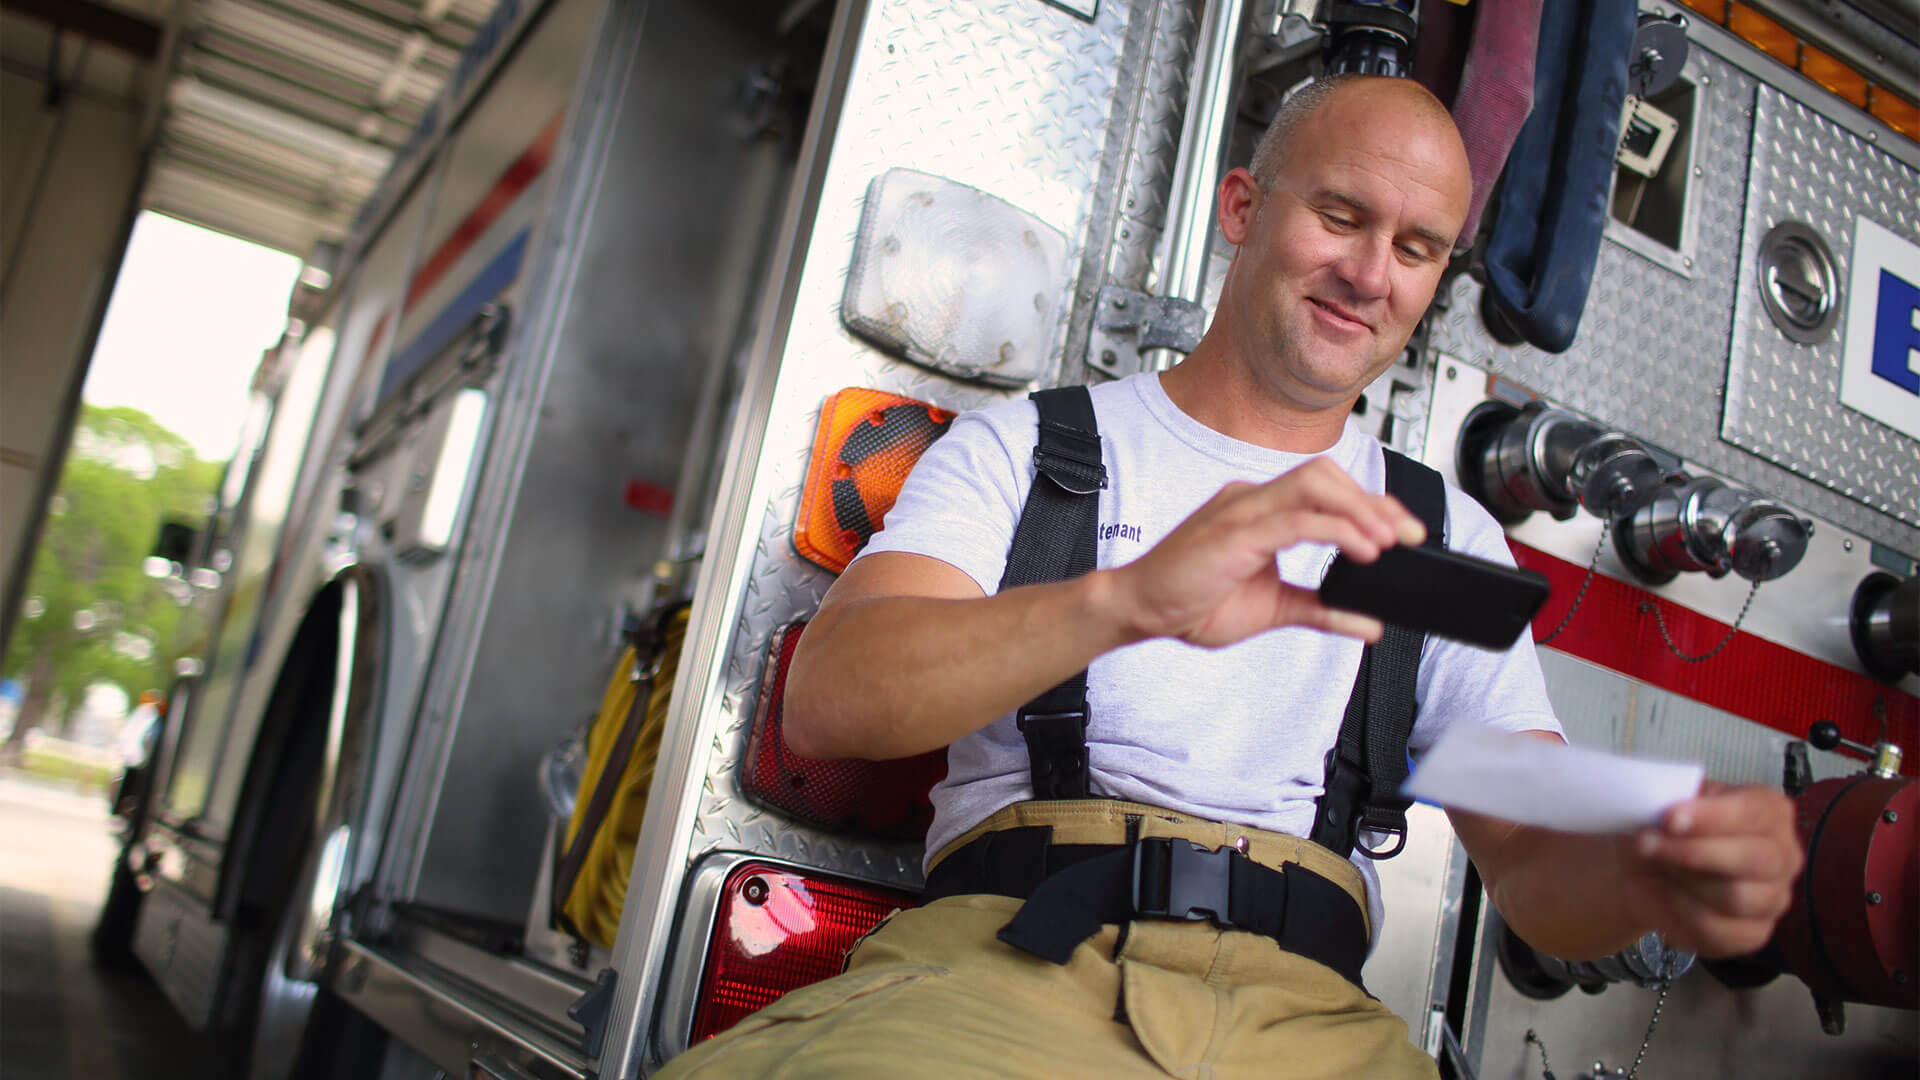 Firefighter using mobile banking.